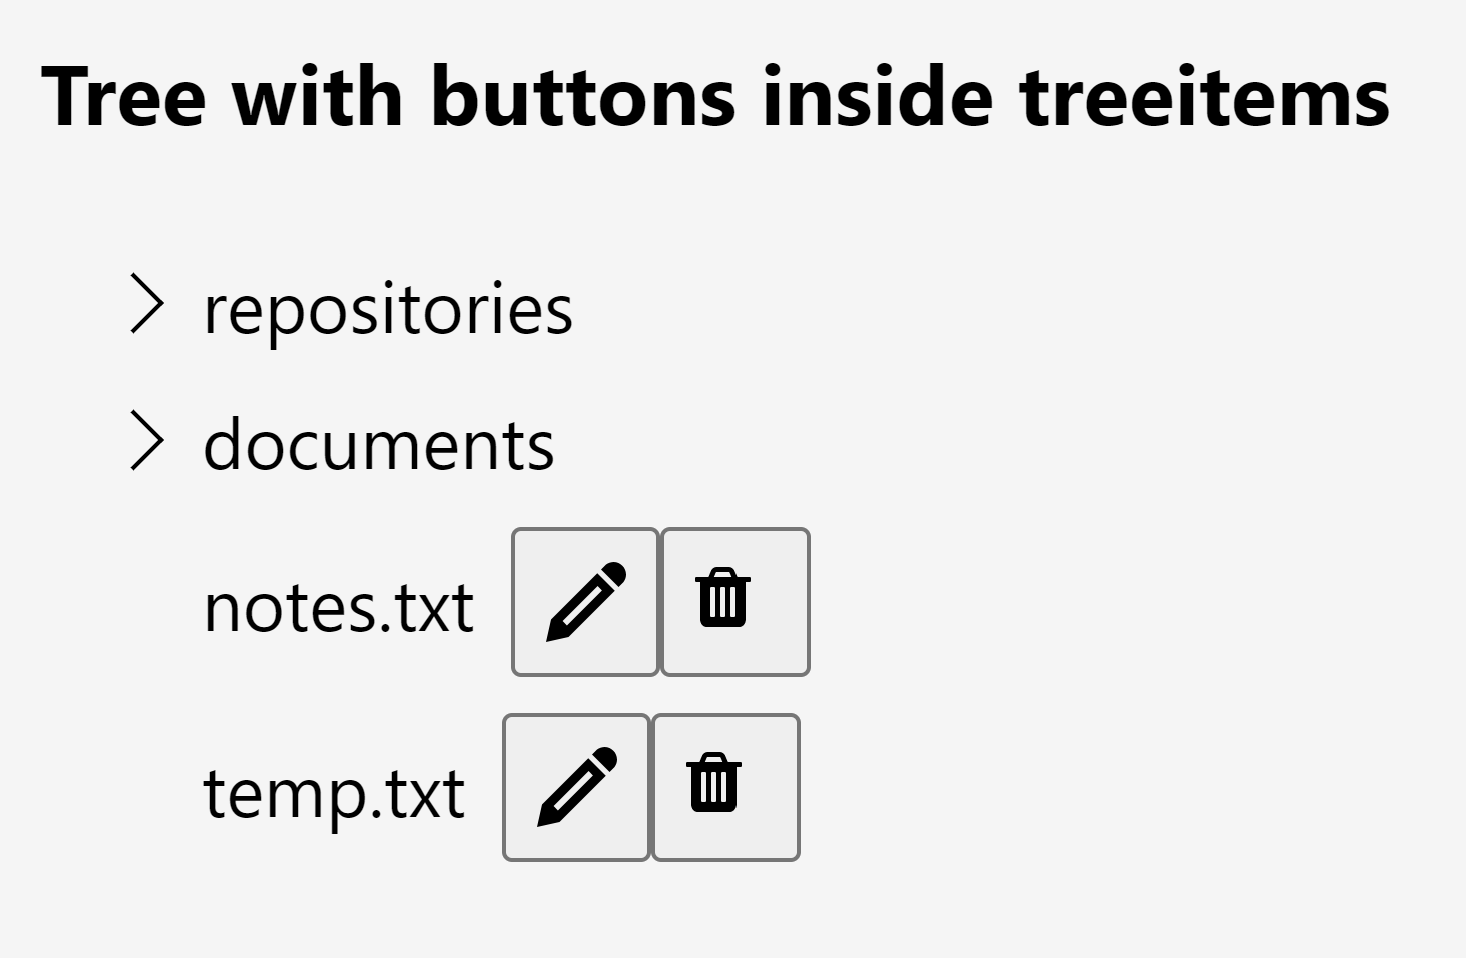 a treeview where each item has an edit and delete button next to the tree item text, with the heading tree with buttons inside treeitems